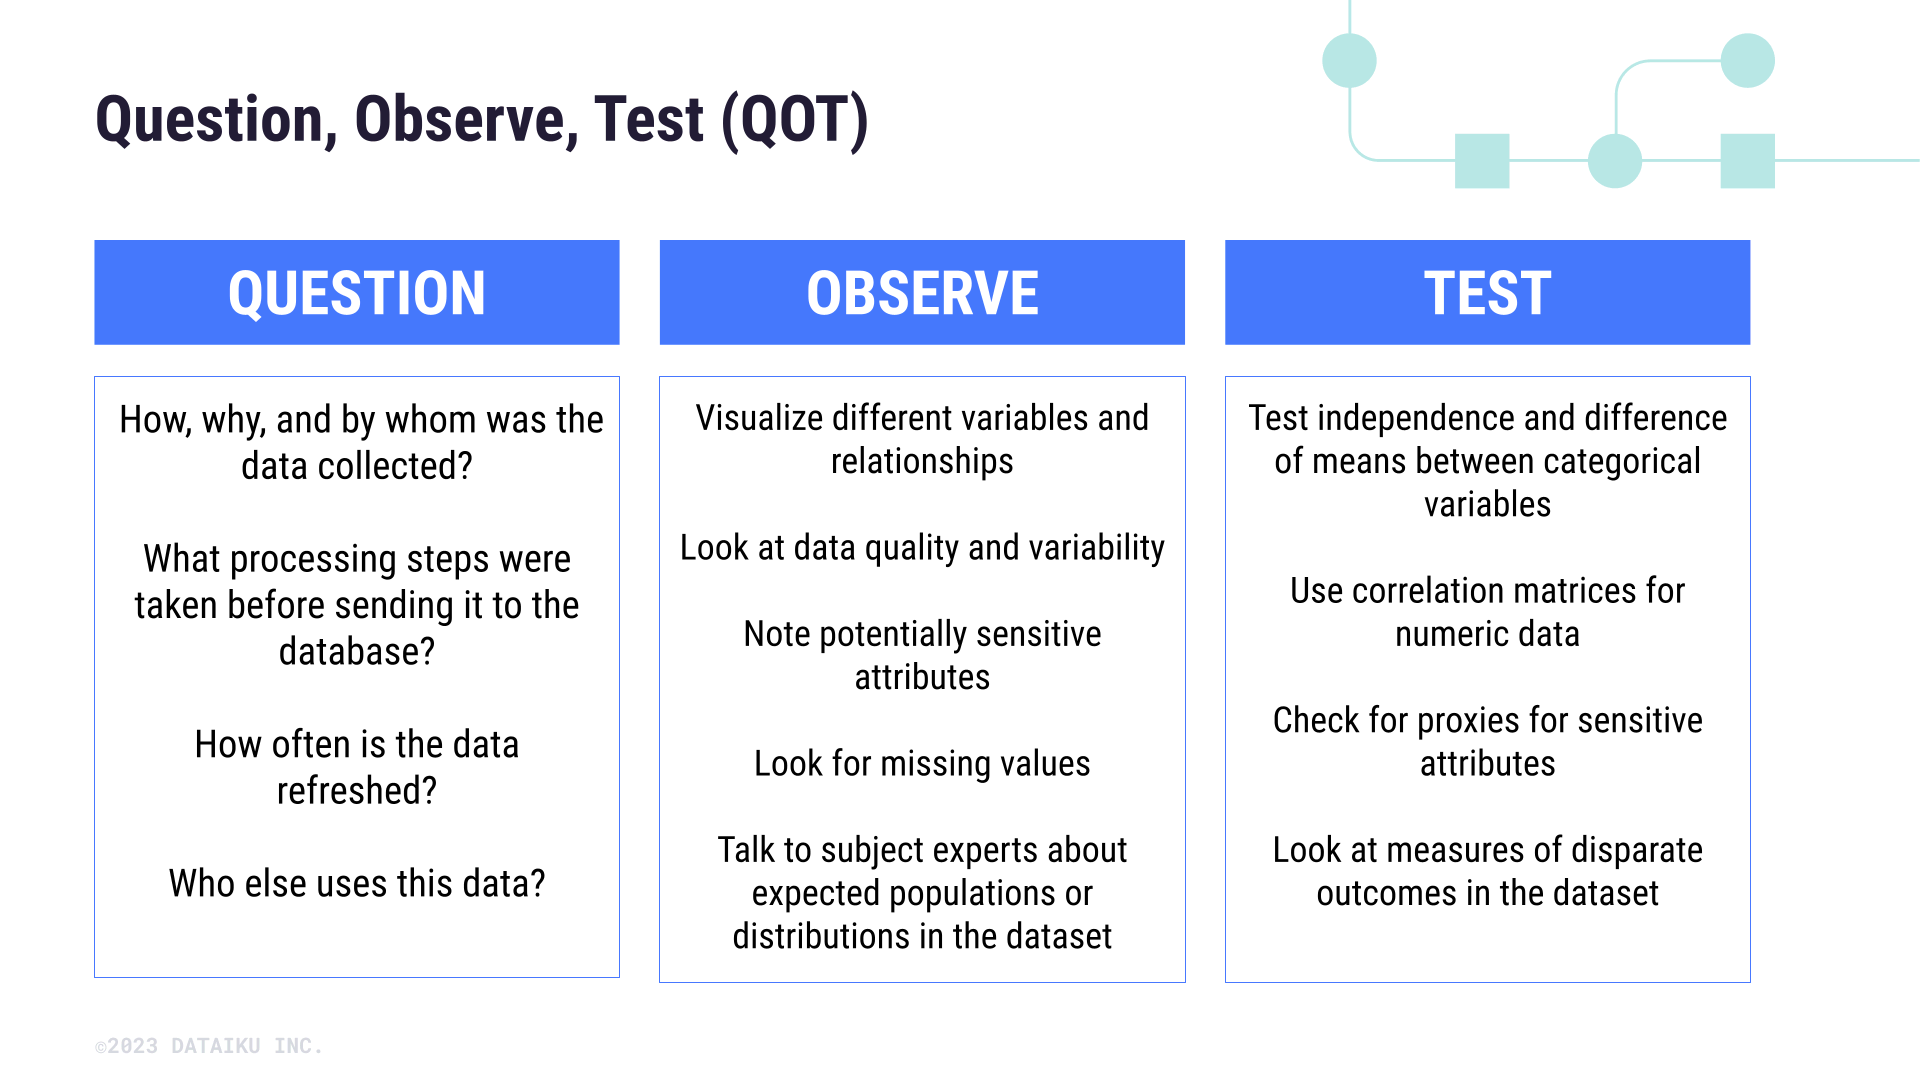 Examples of what to think about during each QOT stage.